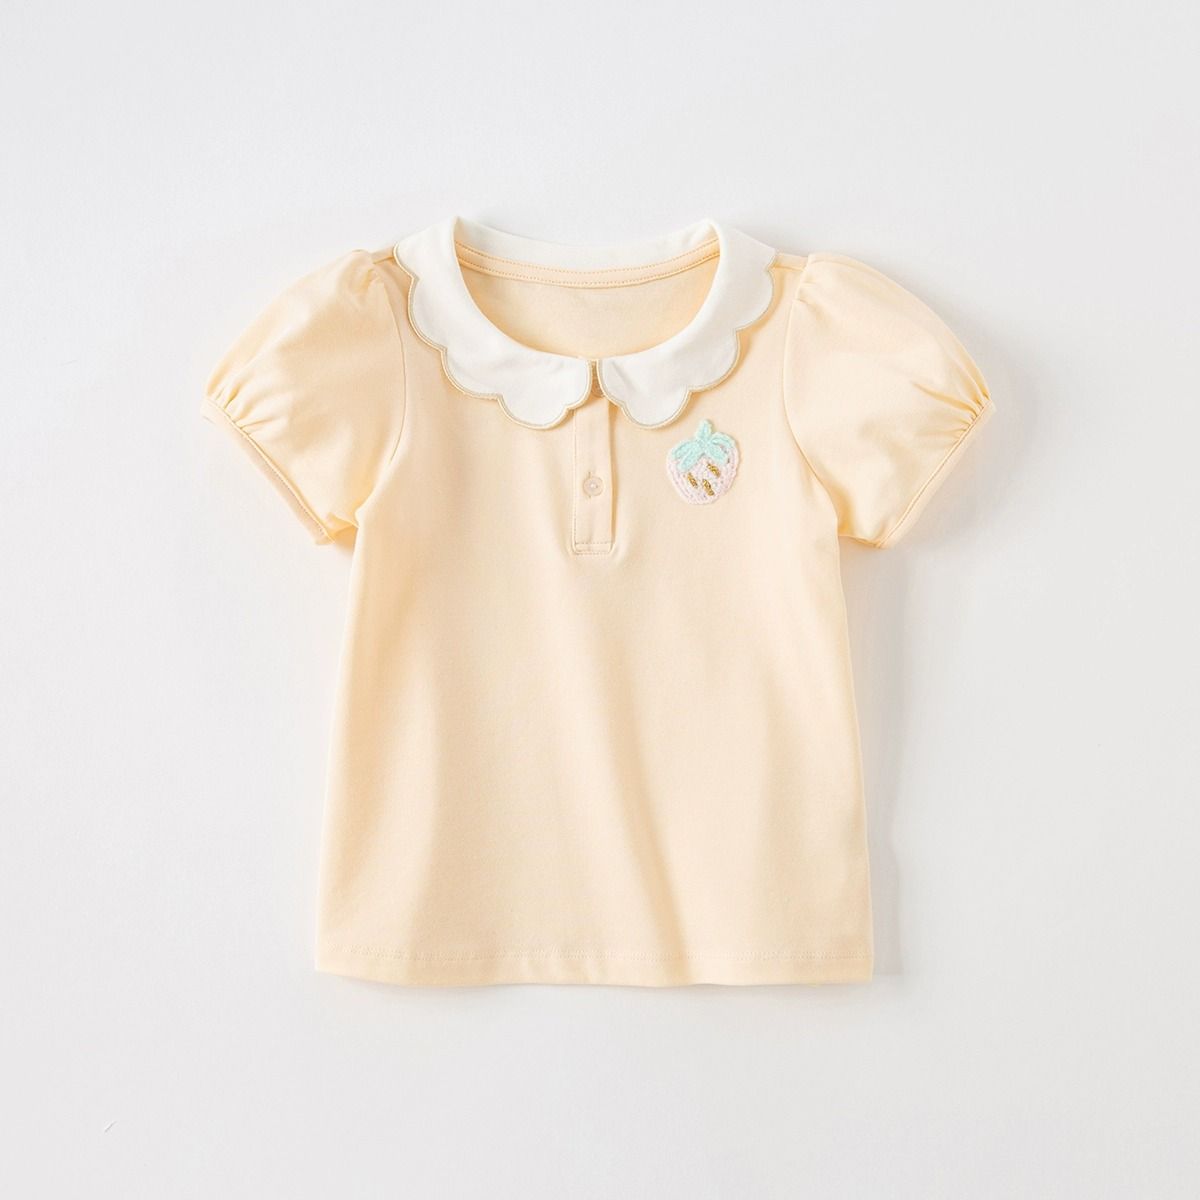 Children's T-shirt 2023 summer new style girls POLO shirt for small and medium-sized children baby doll collar fashionable thin top 1-3 years old